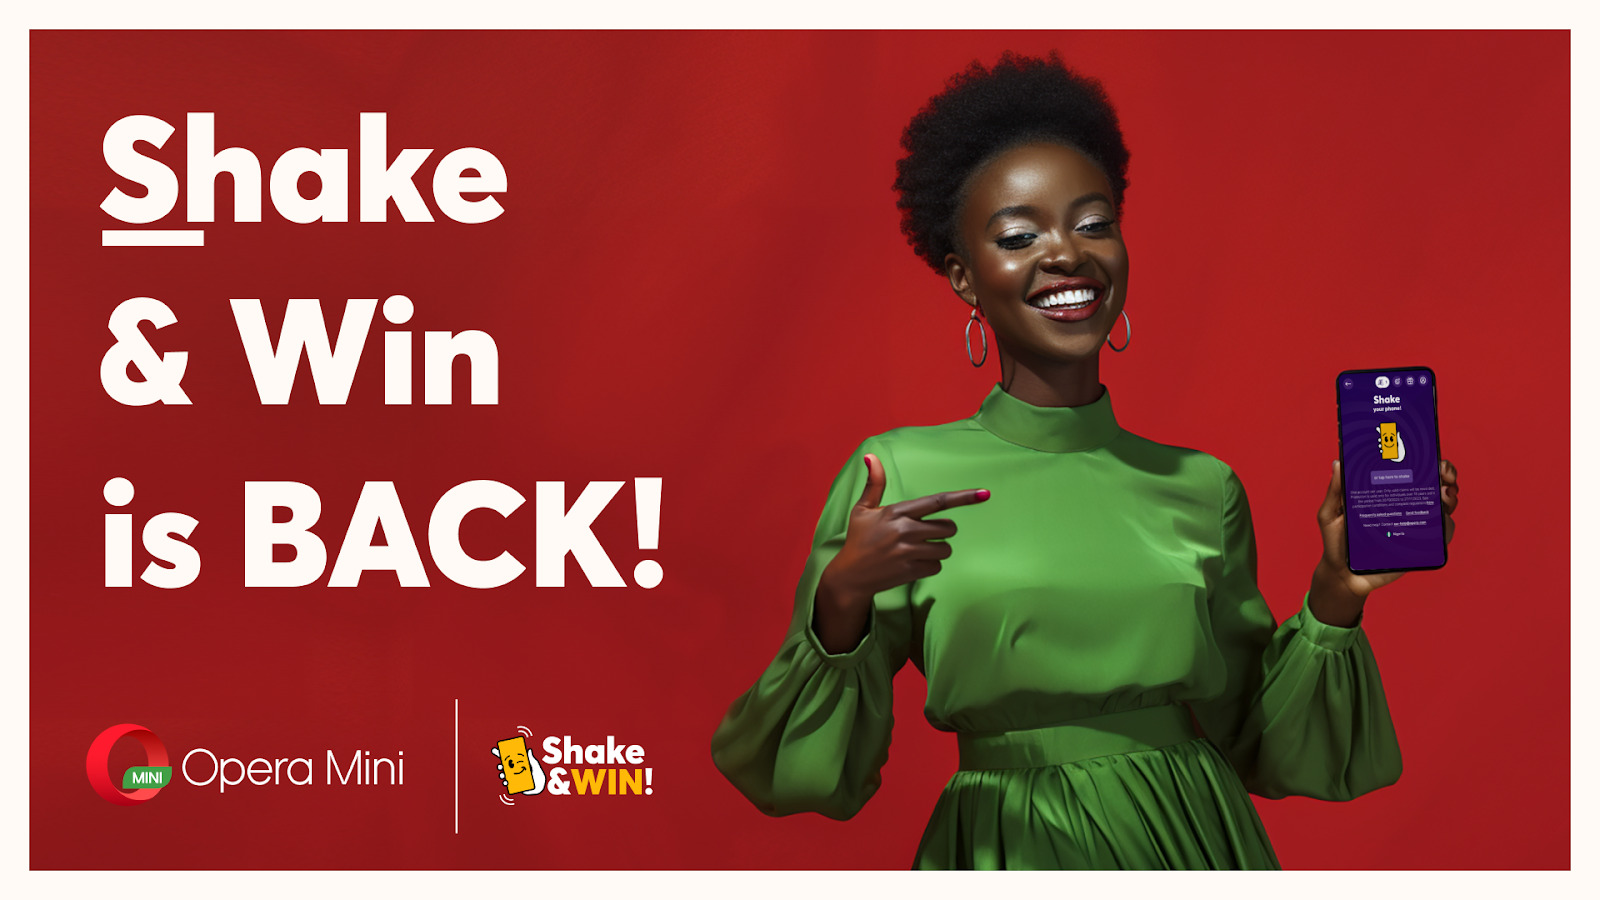 An Opera Mini user evinces the excitement of Shake and Win.